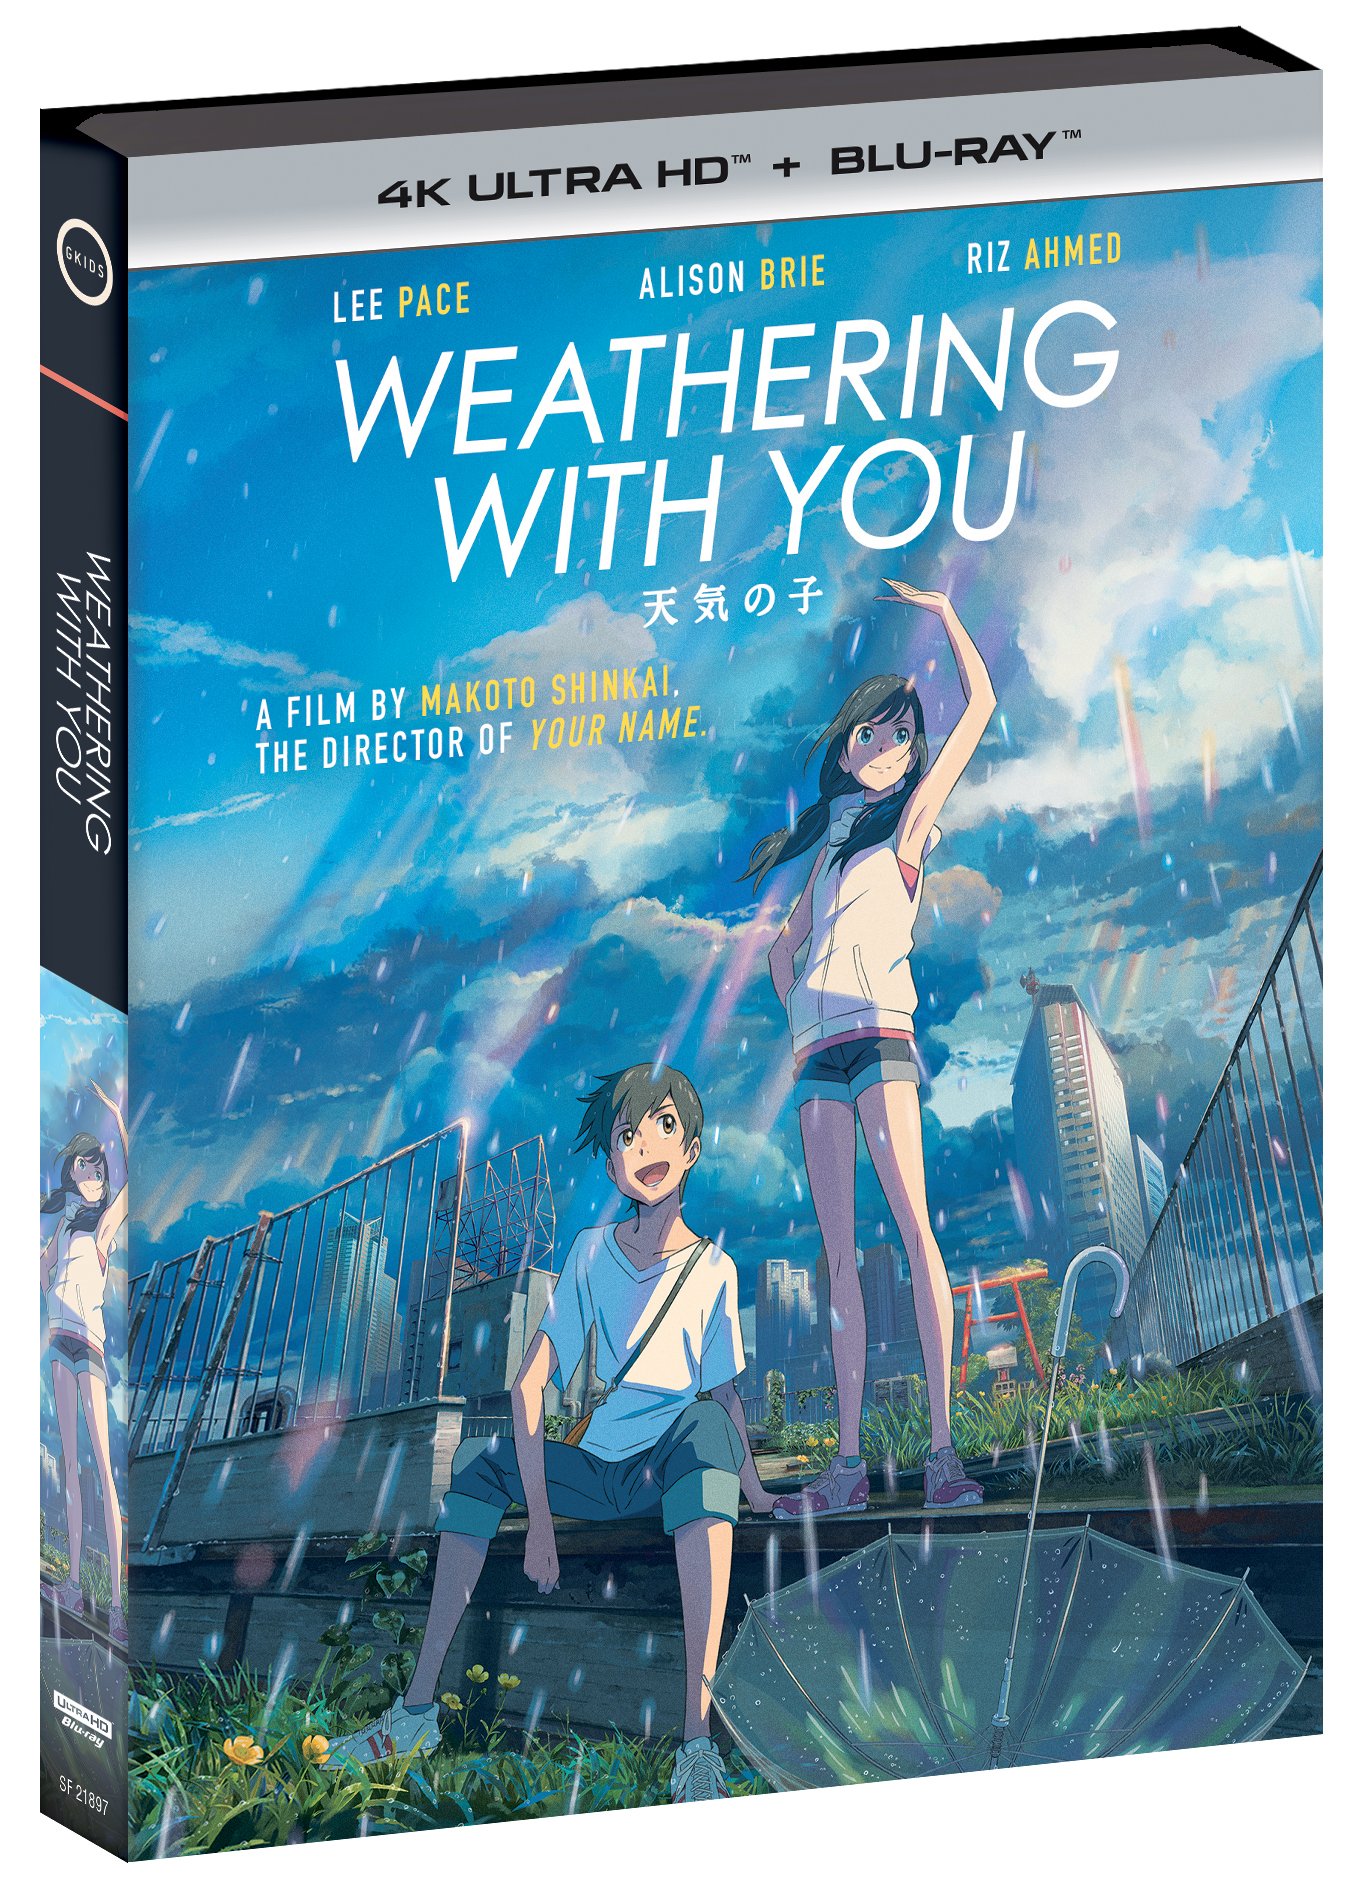 Weathering With You 4K release